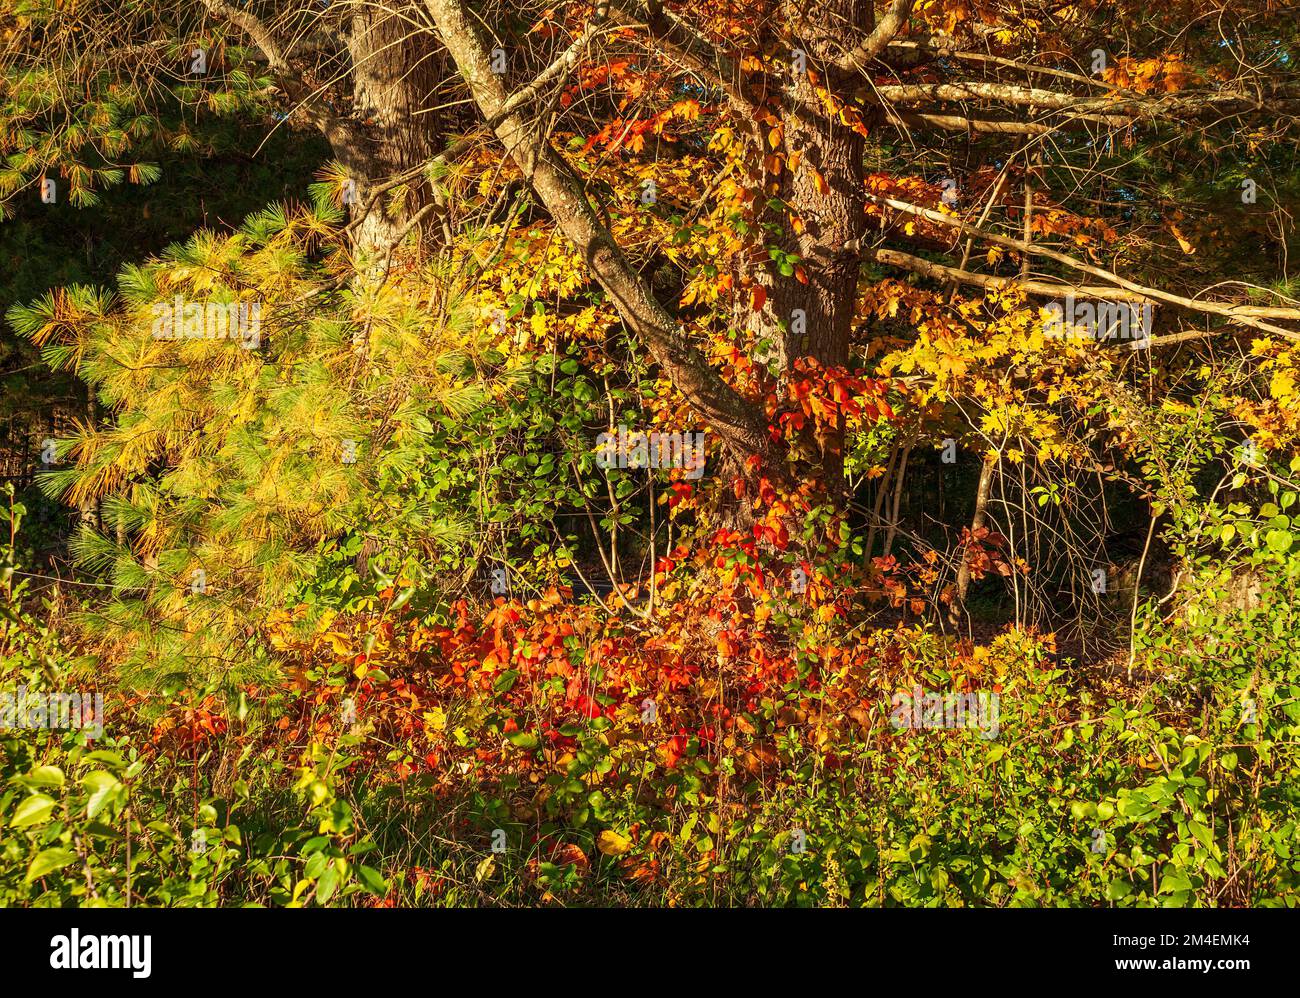 The trunk of a eastern white pine tree (Pinus strobus) and shrubs at peak fall foliage, in shades of brilliant yellow, orange and red. Natick, MA Stock Photo